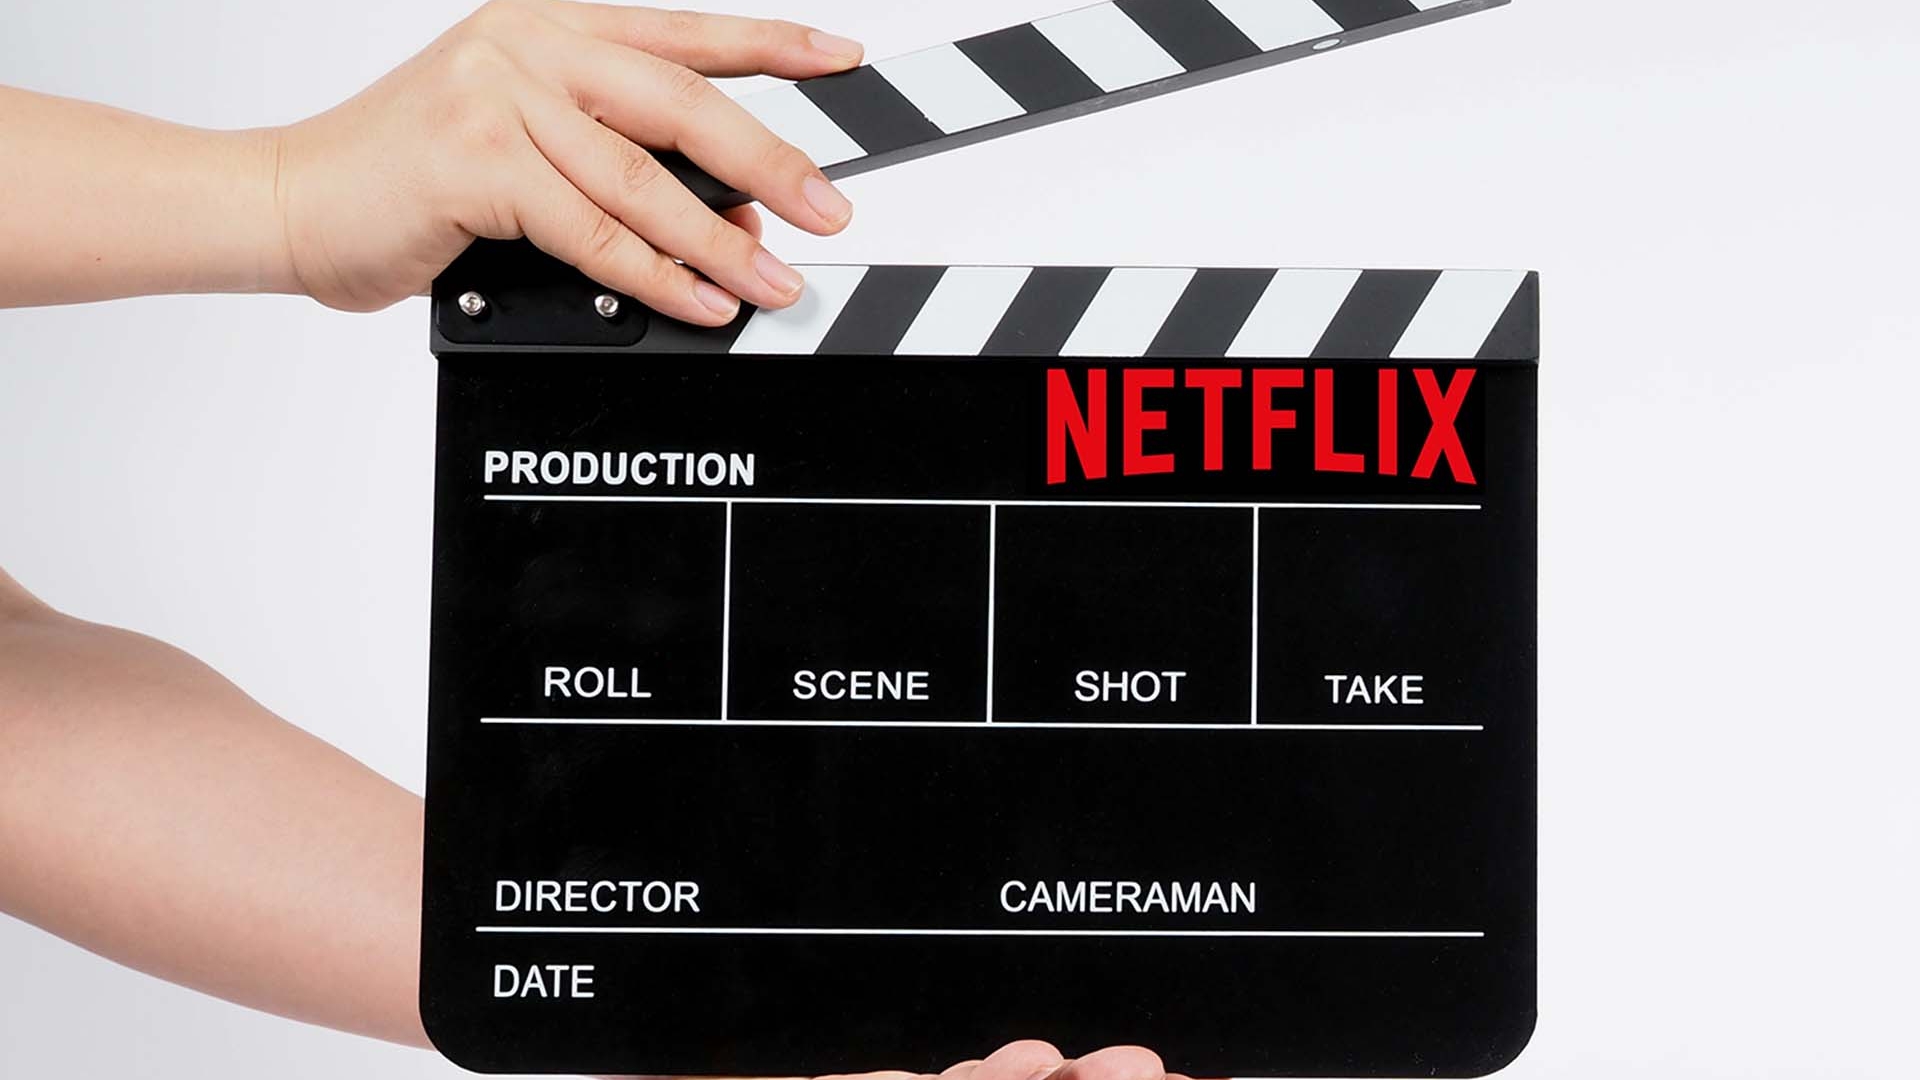 Shocking moment Netflix boss reveals plot to charge users who share passwords